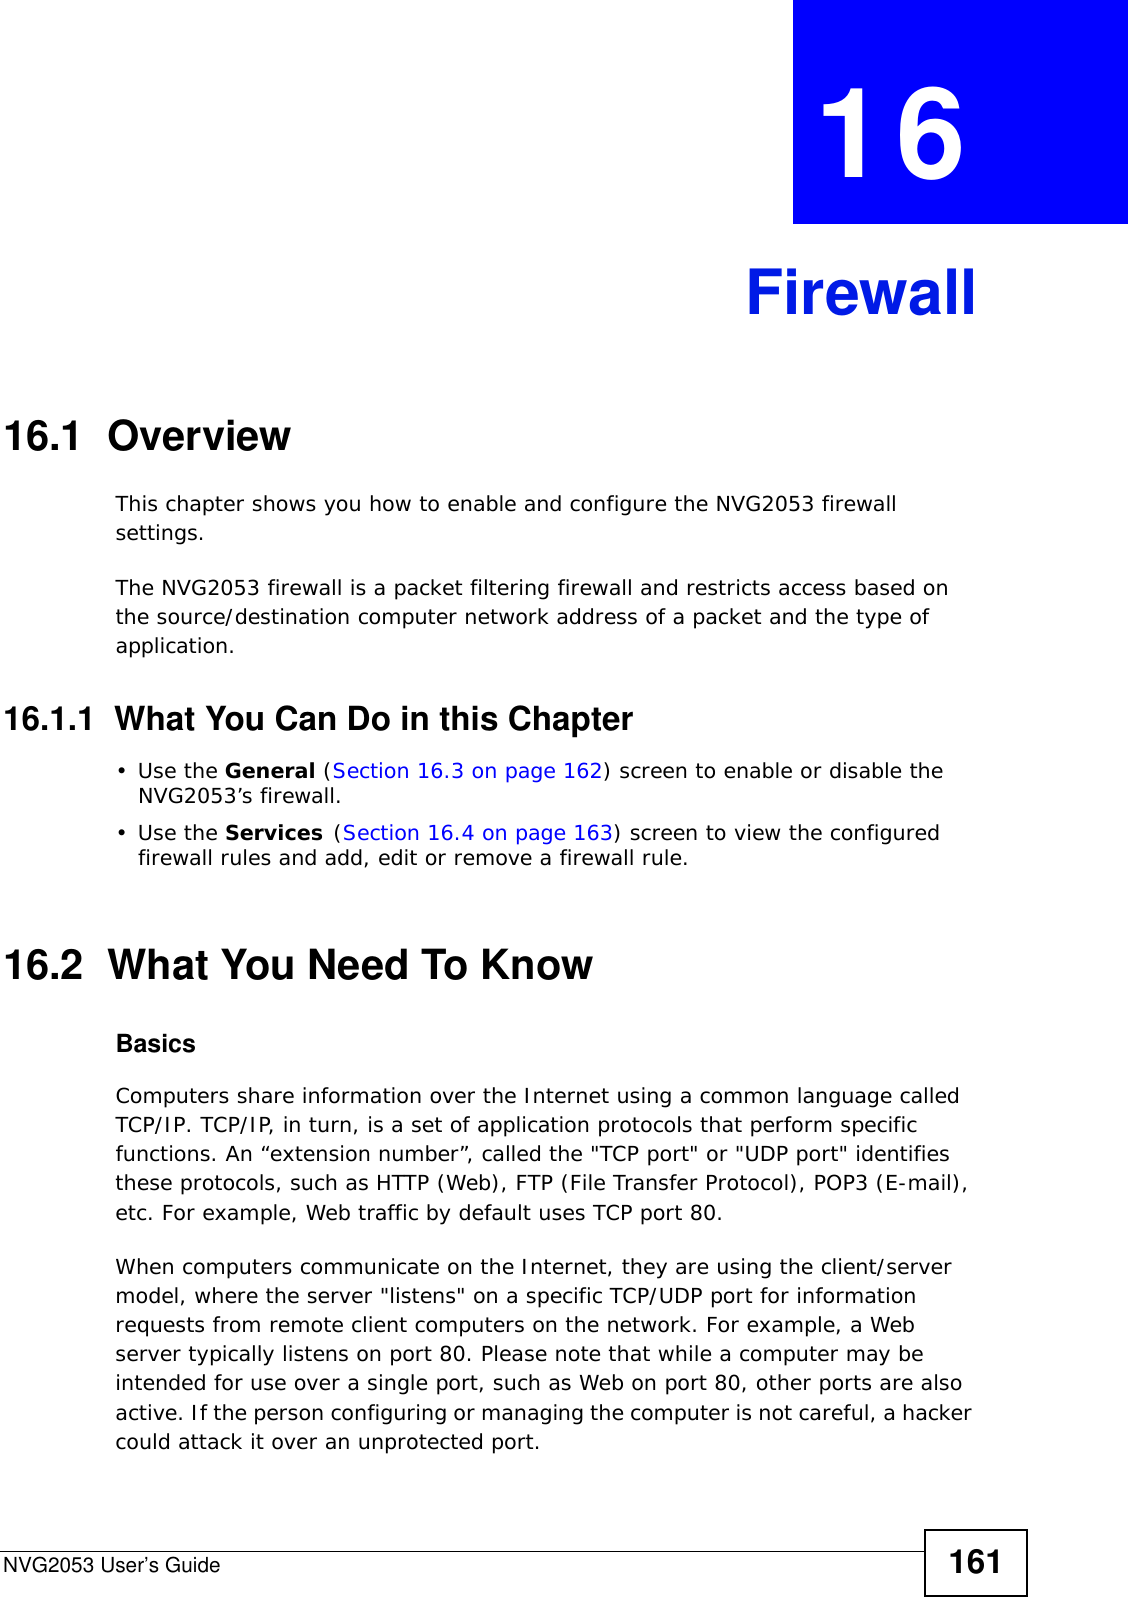 NVG2053 User’s Guide 161CHAPTER  16  Firewall16.1  Overview   This chapter shows you how to enable and configure the NVG2053 firewall settings.The NVG2053 firewall is a packet filtering firewall and restricts access based on the source/destination computer network address of a packet and the type of application. 16.1.1  What You Can Do in this Chapter•Use the General (Section 16.3 on page 162) screen to enable or disable the NVG2053’s firewall.•Use the Services (Section 16.4 on page 163) screen to view the configured firewall rules and add, edit or remove a firewall rule.16.2  What You Need To KnowBasicsComputers share information over the Internet using a common language called TCP/IP. TCP/IP, in turn, is a set of application protocols that perform specific functions. An “extension number”, called the &quot;TCP port&quot; or &quot;UDP port&quot; identifies these protocols, such as HTTP (Web), FTP (File Transfer Protocol), POP3 (E-mail), etc. For example, Web traffic by default uses TCP port 80. When computers communicate on the Internet, they are using the client/server model, where the server &quot;listens&quot; on a specific TCP/UDP port for information requests from remote client computers on the network. For example, a Web server typically listens on port 80. Please note that while a computer may be intended for use over a single port, such as Web on port 80, other ports are also active. If the person configuring or managing the computer is not careful, a hacker could attack it over an unprotected port. 